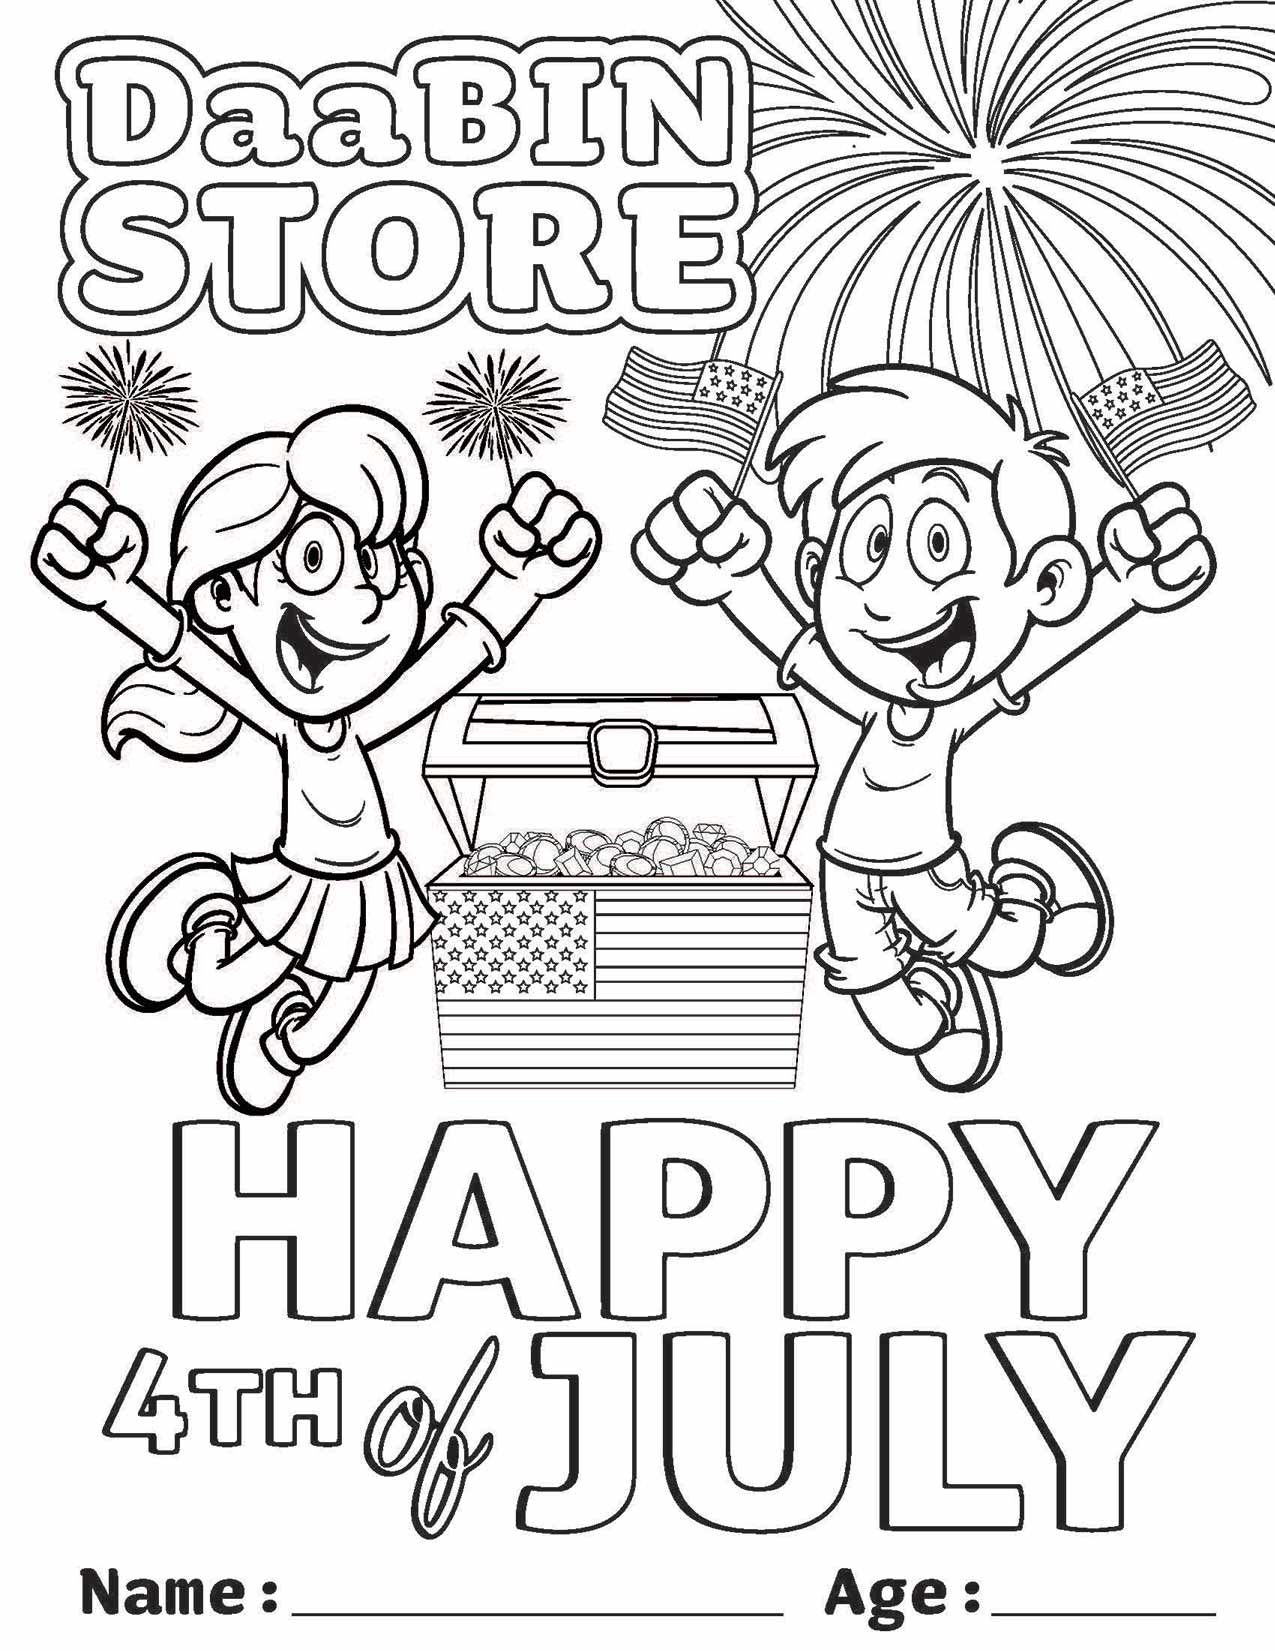 4th of July - Coloring Sheet